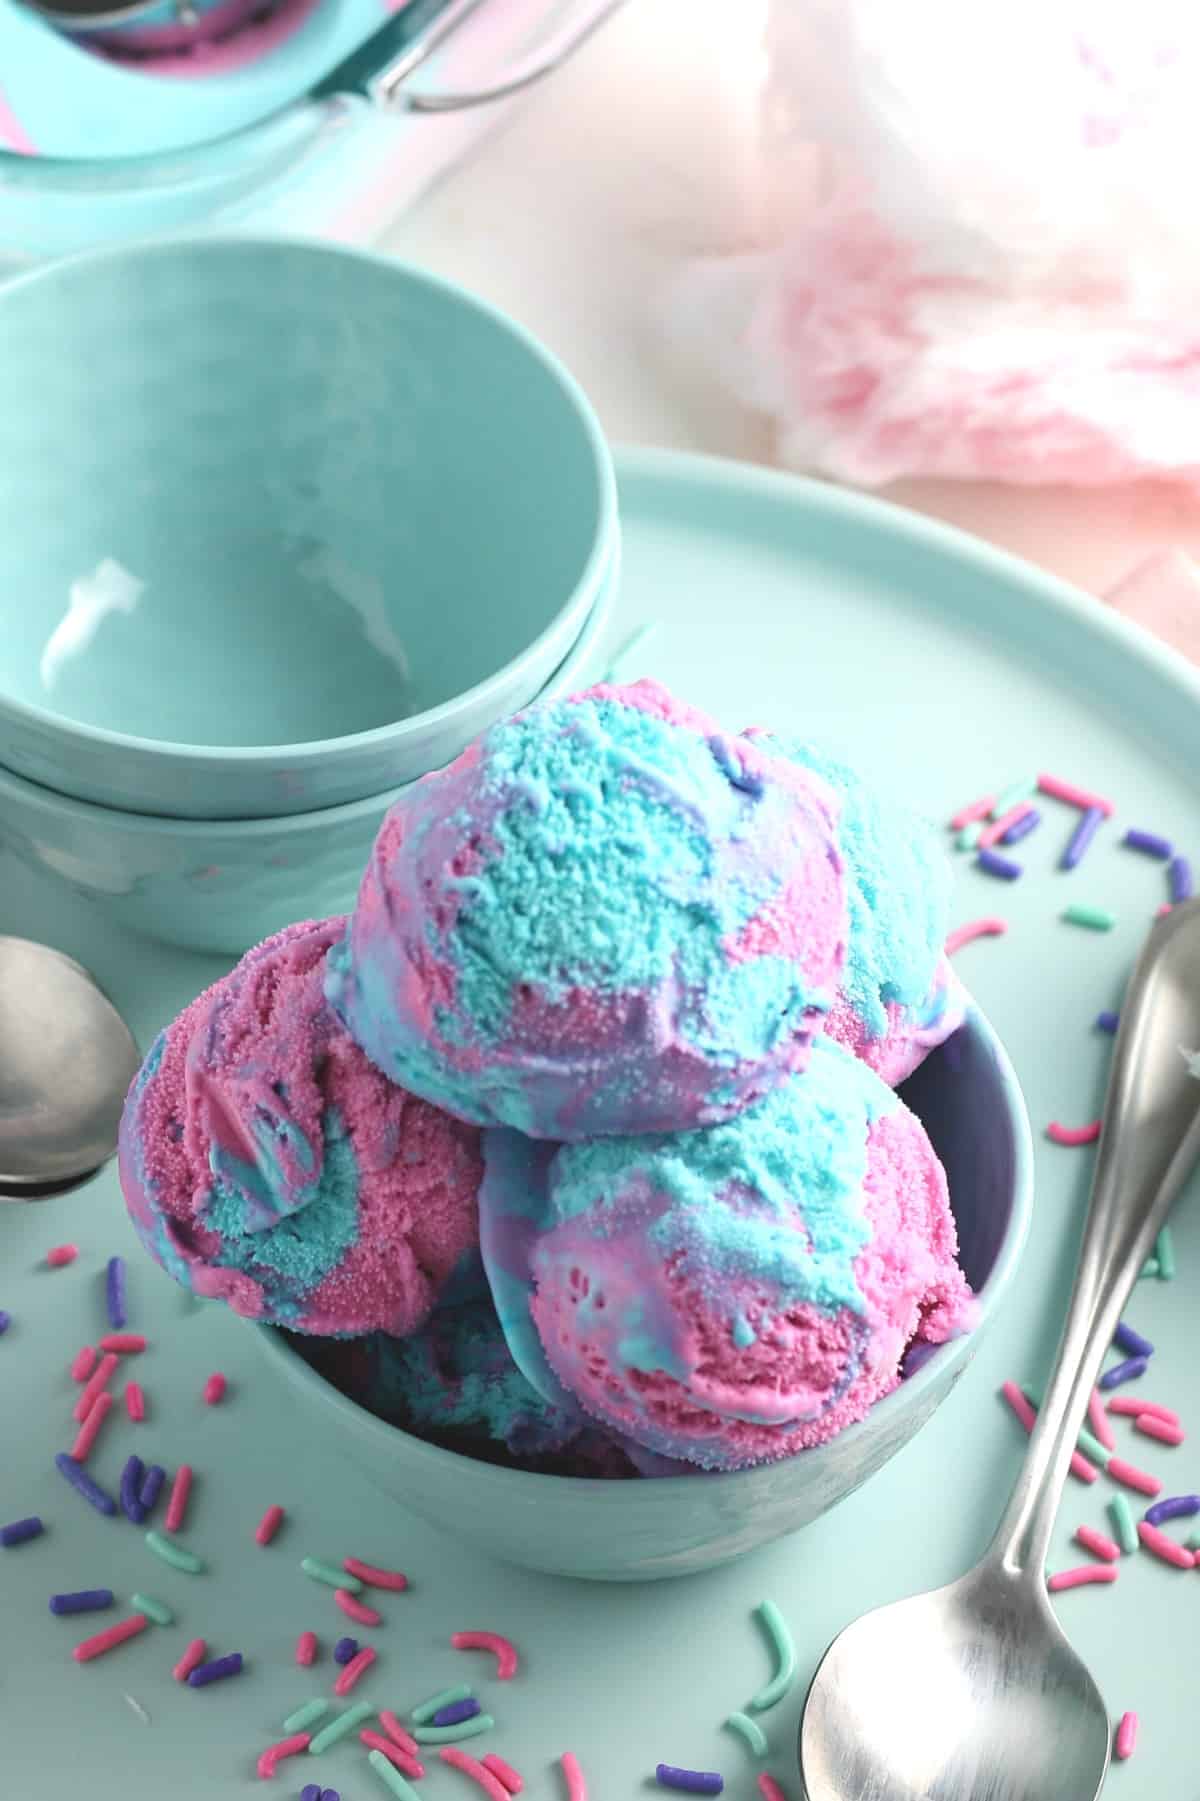 How to Create Magical Cotton Ice: Simple Recipe